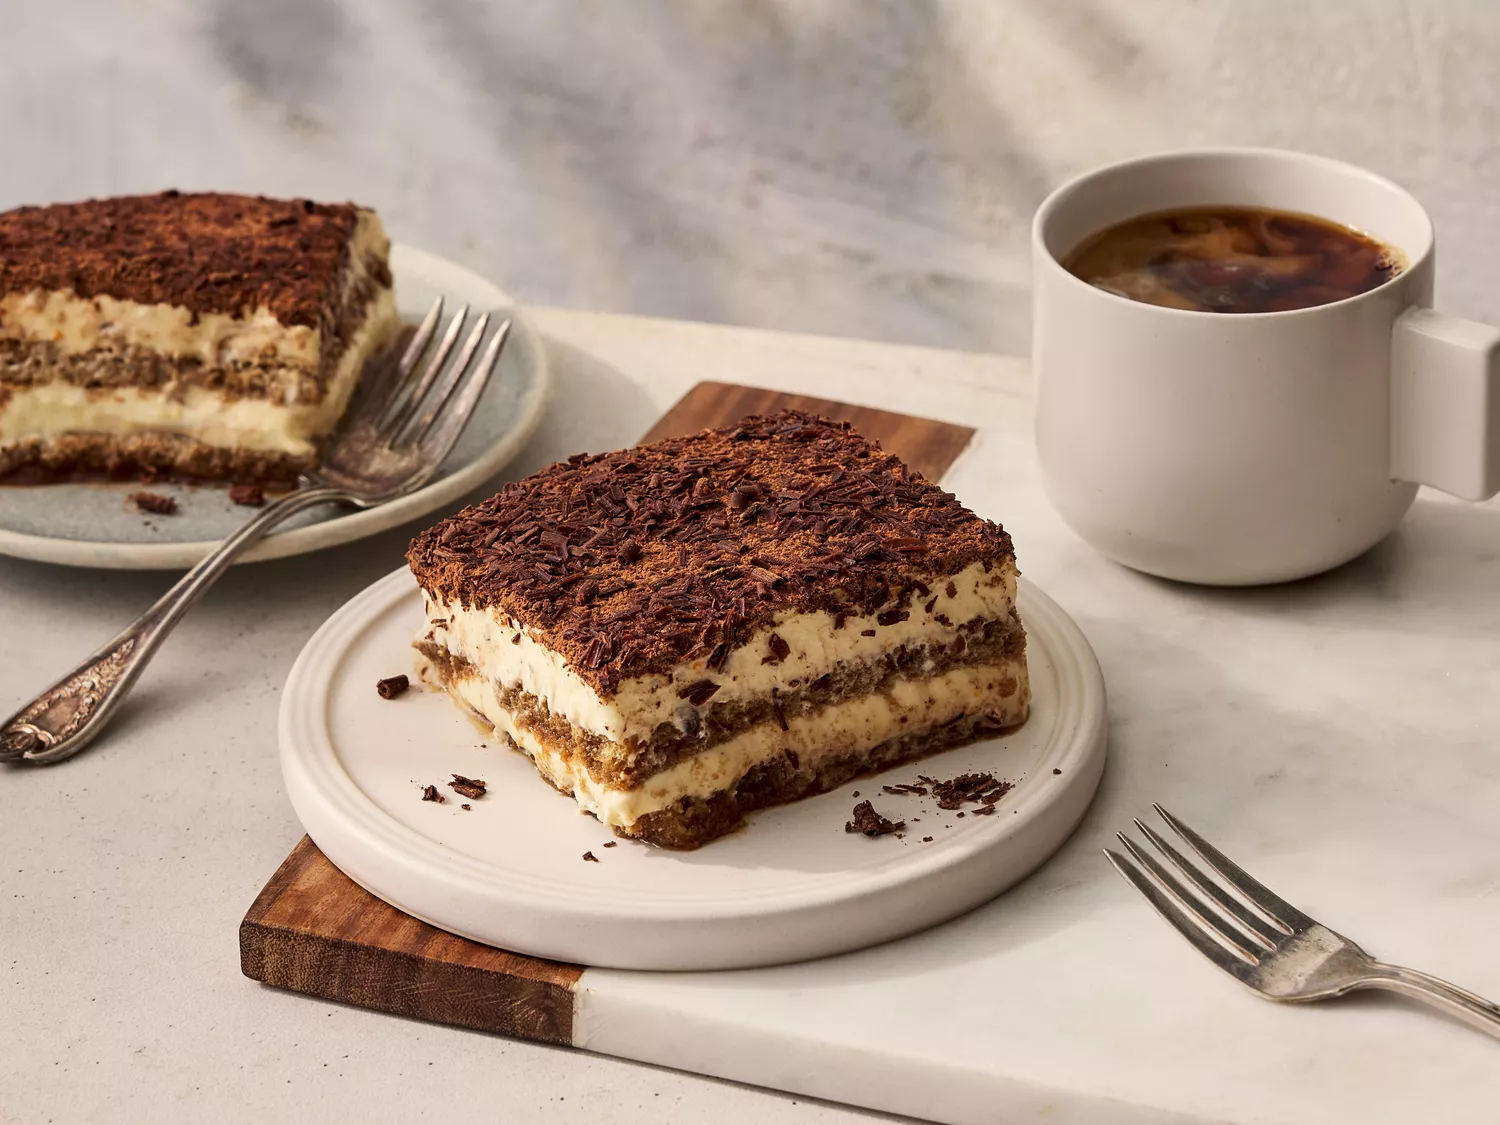 Southern Living Tiramisu two servings on plates with a small cup of coffee